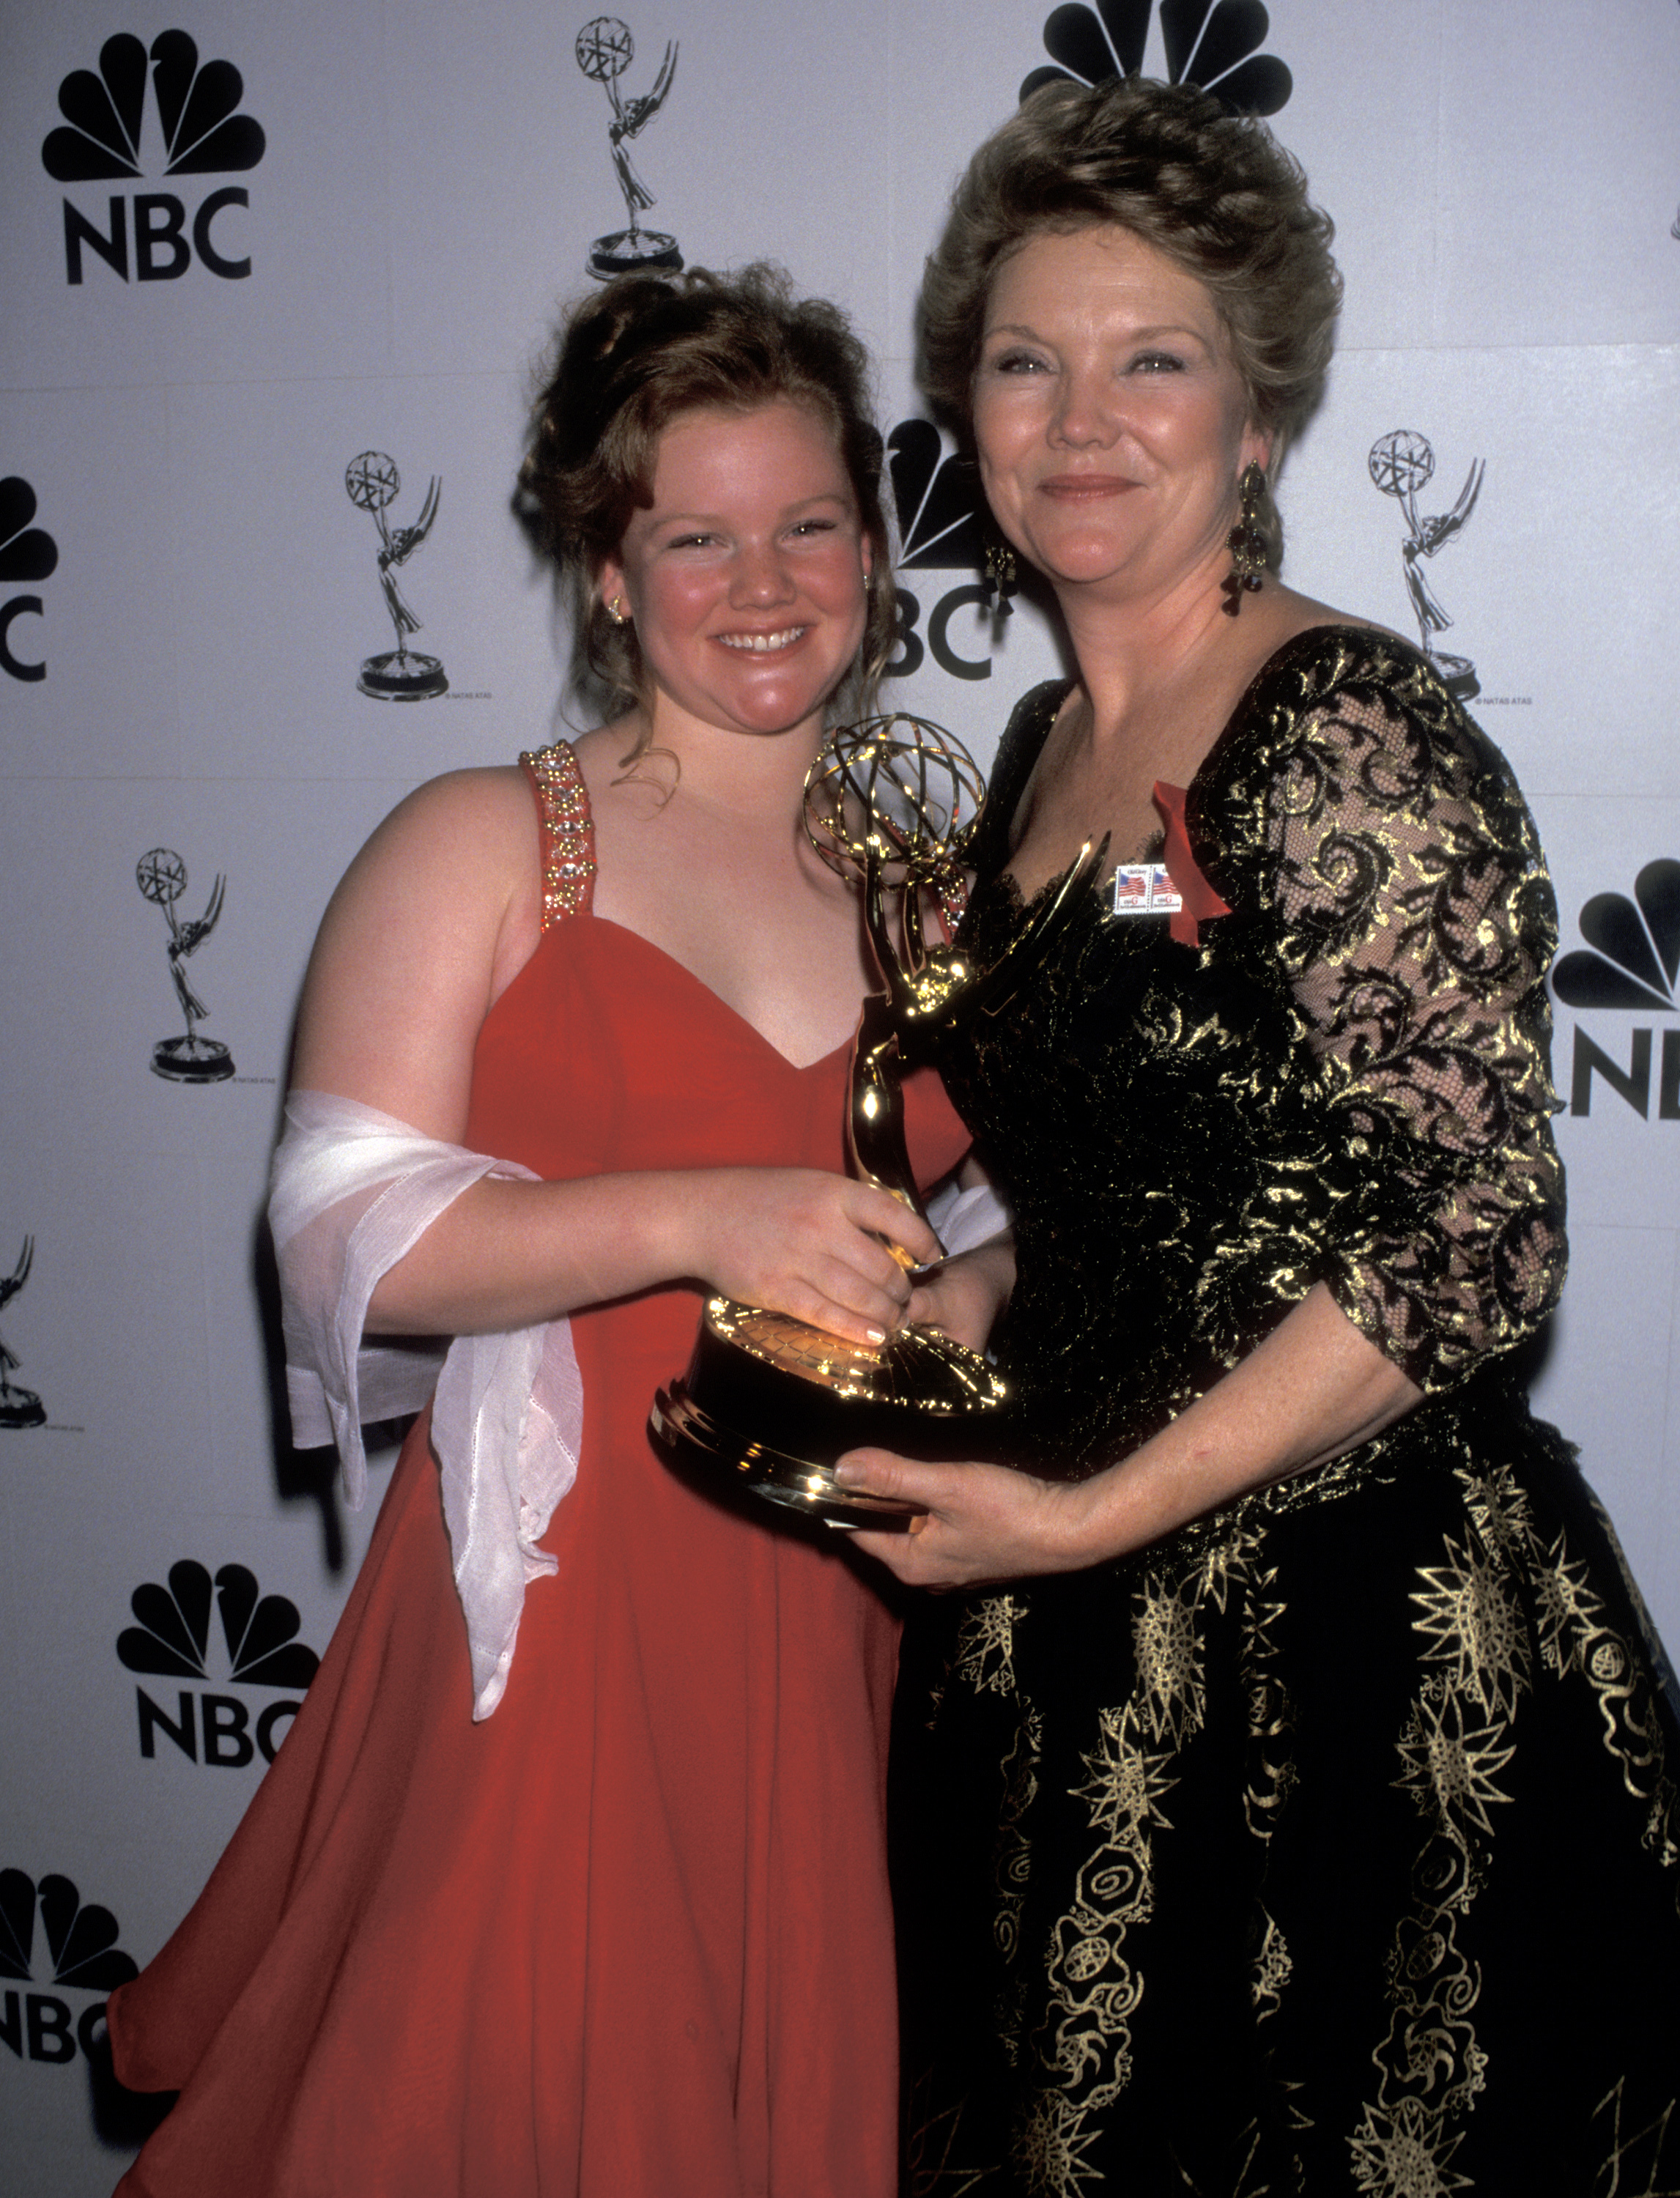 Amanda Davies and Erika Slezak at the 22nd Annual Daytime Emmy Awards in New York City on May 19, 1995 | Source: Getty Images